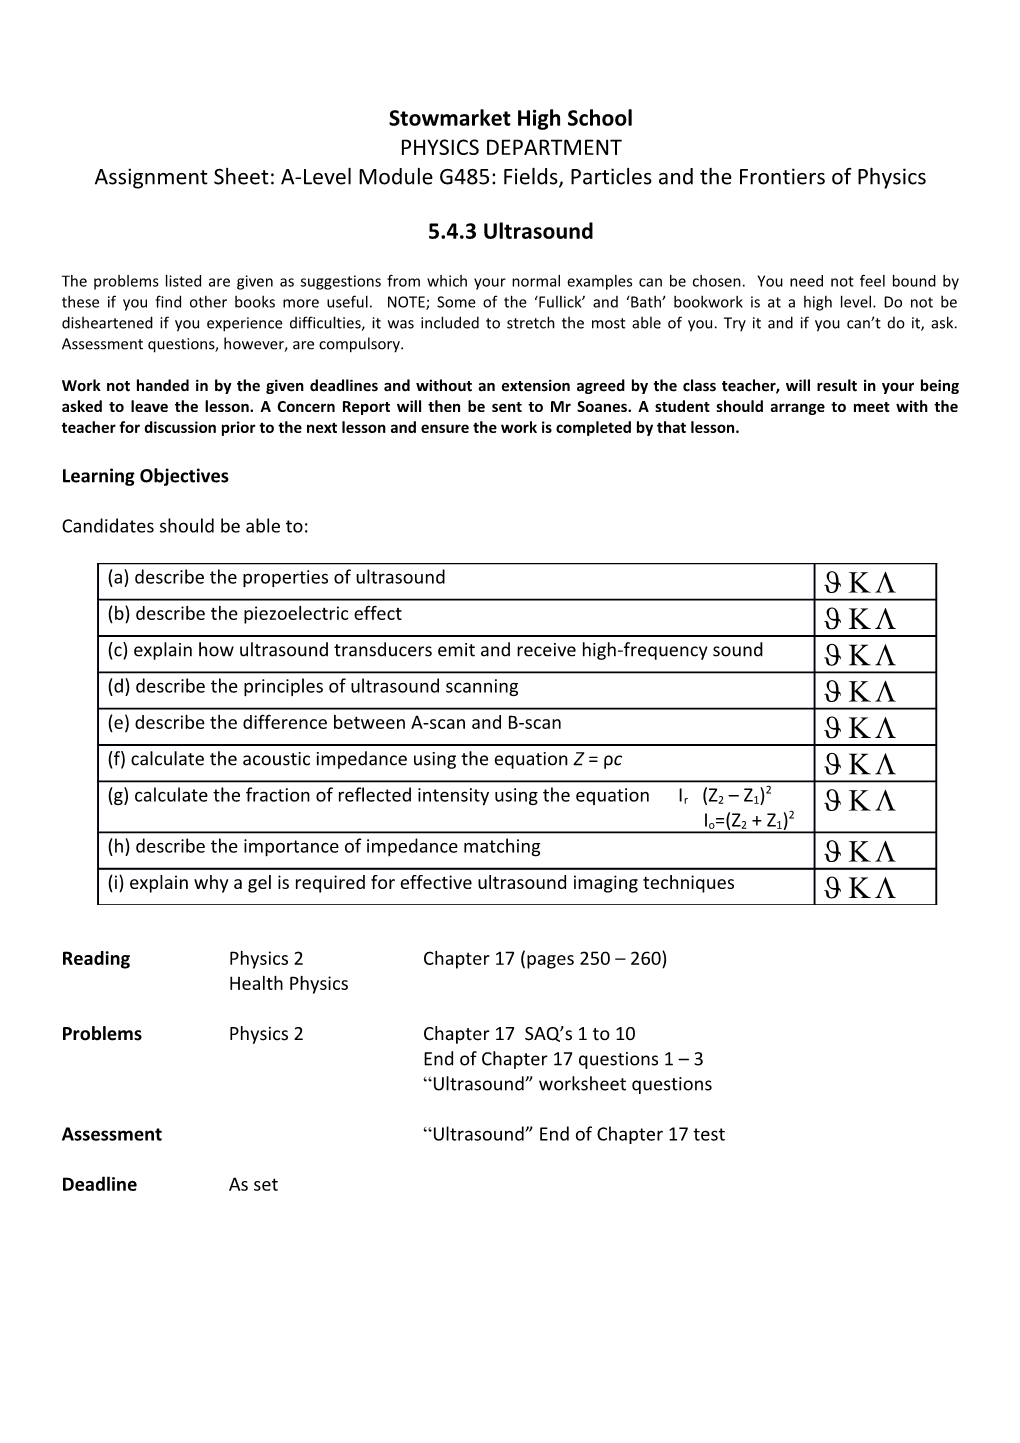 Assignment Sheet: A-Level Module G485: Fields, Particles and the Frontiers of Physics